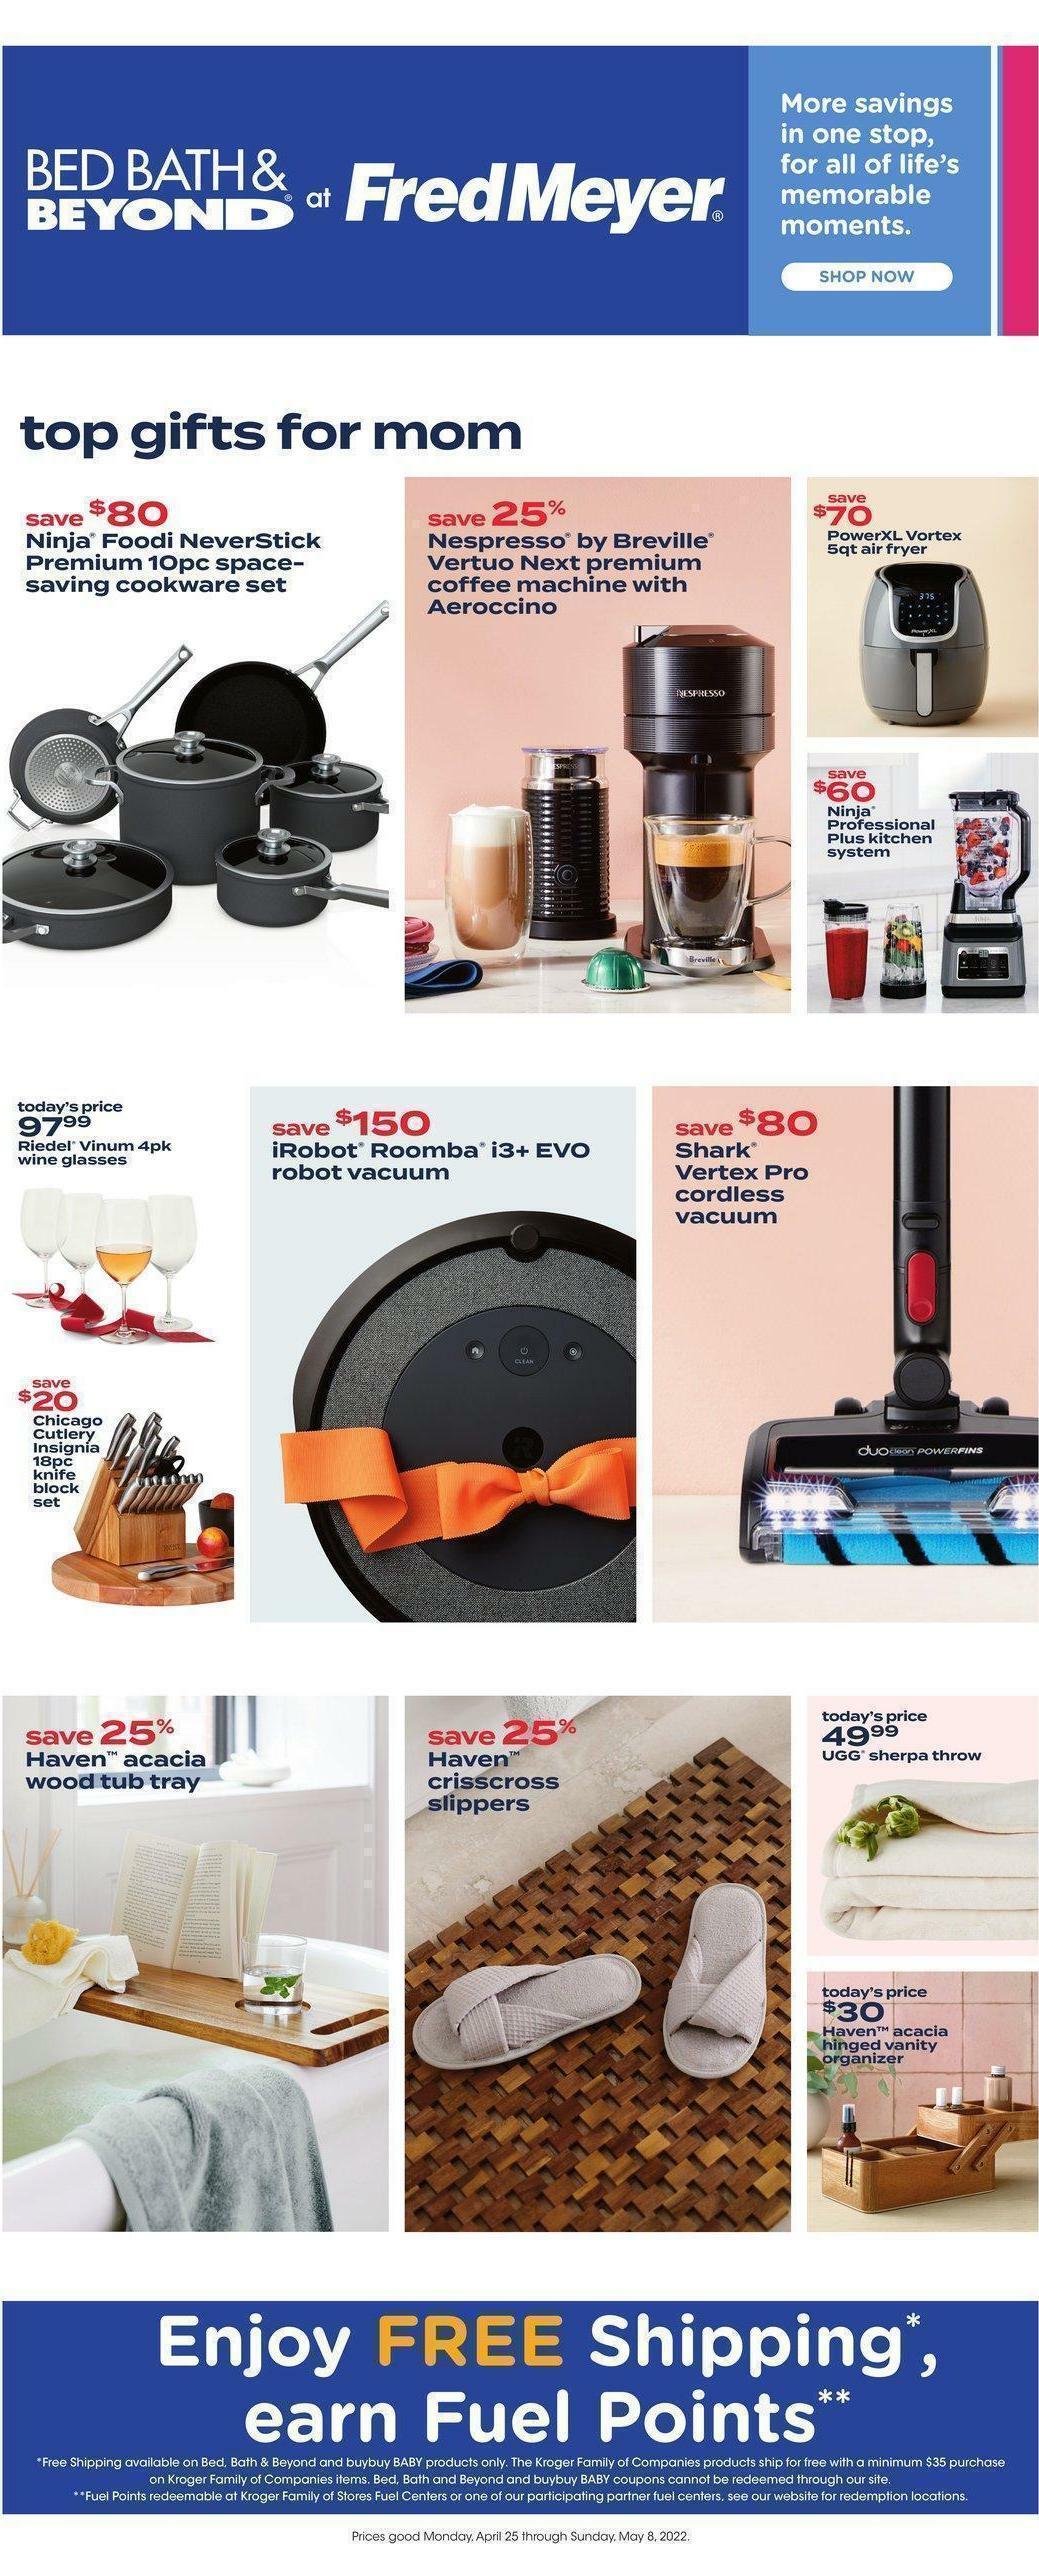 Fred Meyer Bed, Bath & Beyond Weekly Ad from April 25